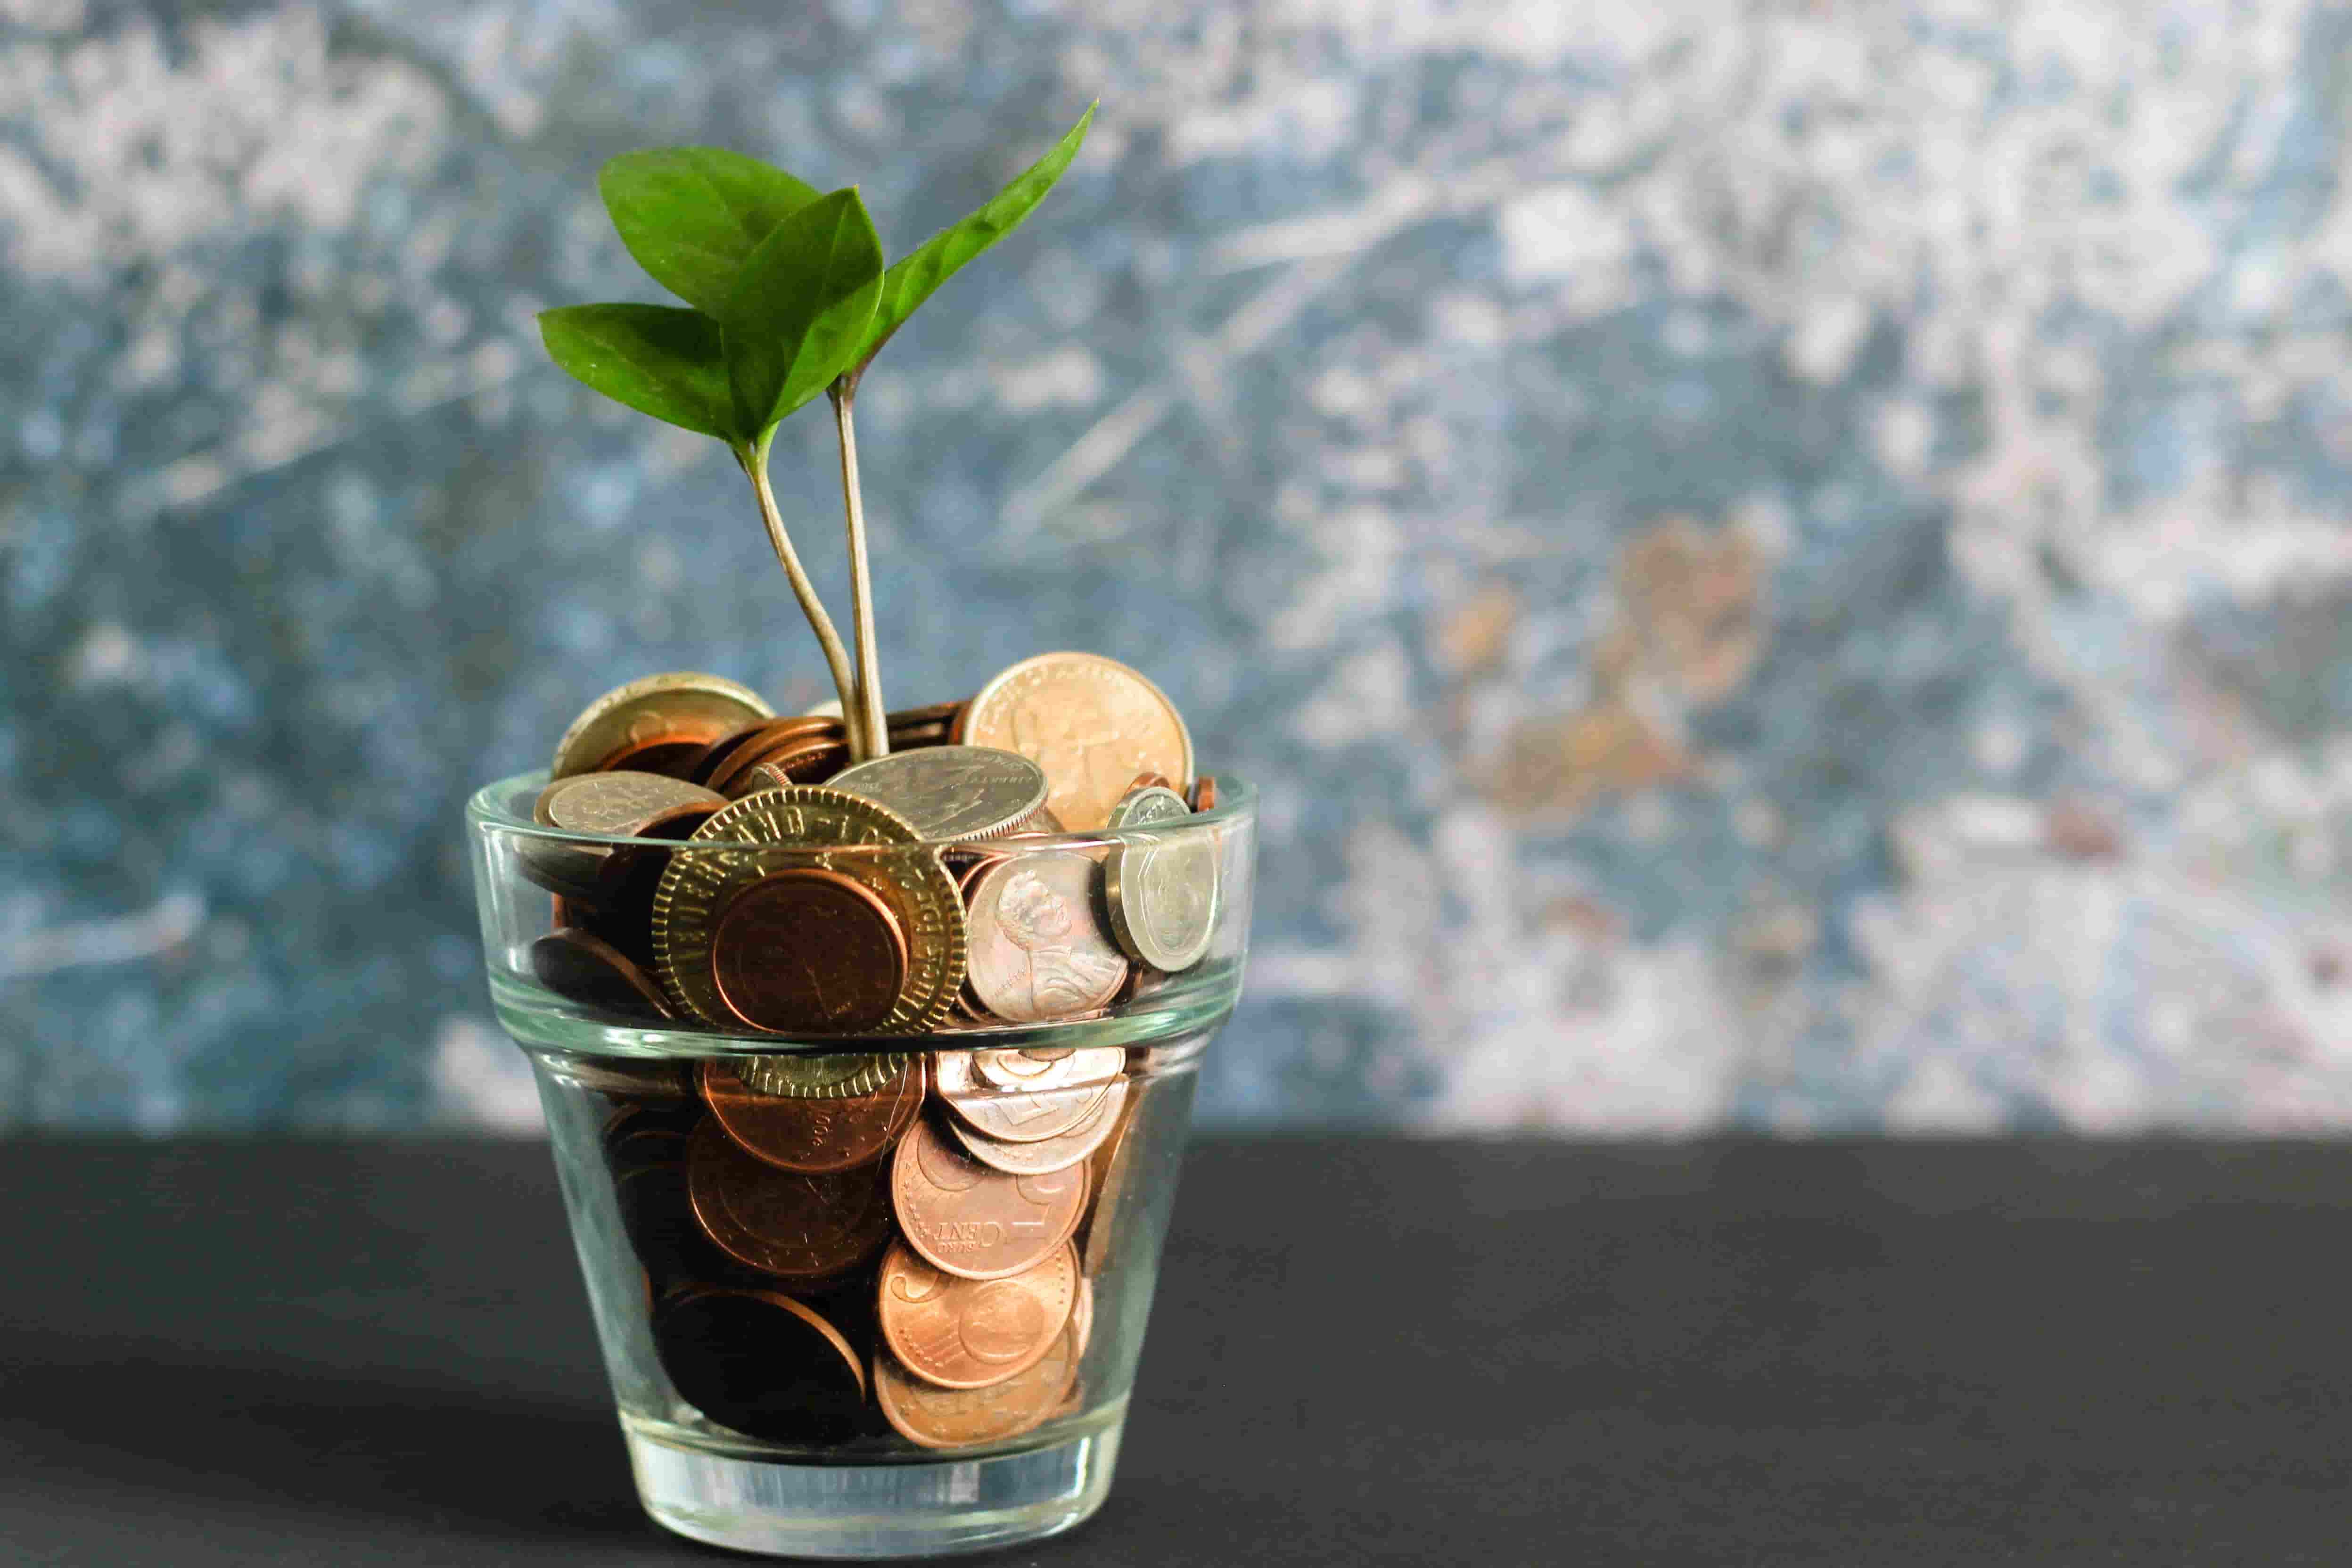 Little plant in vase filled with coins